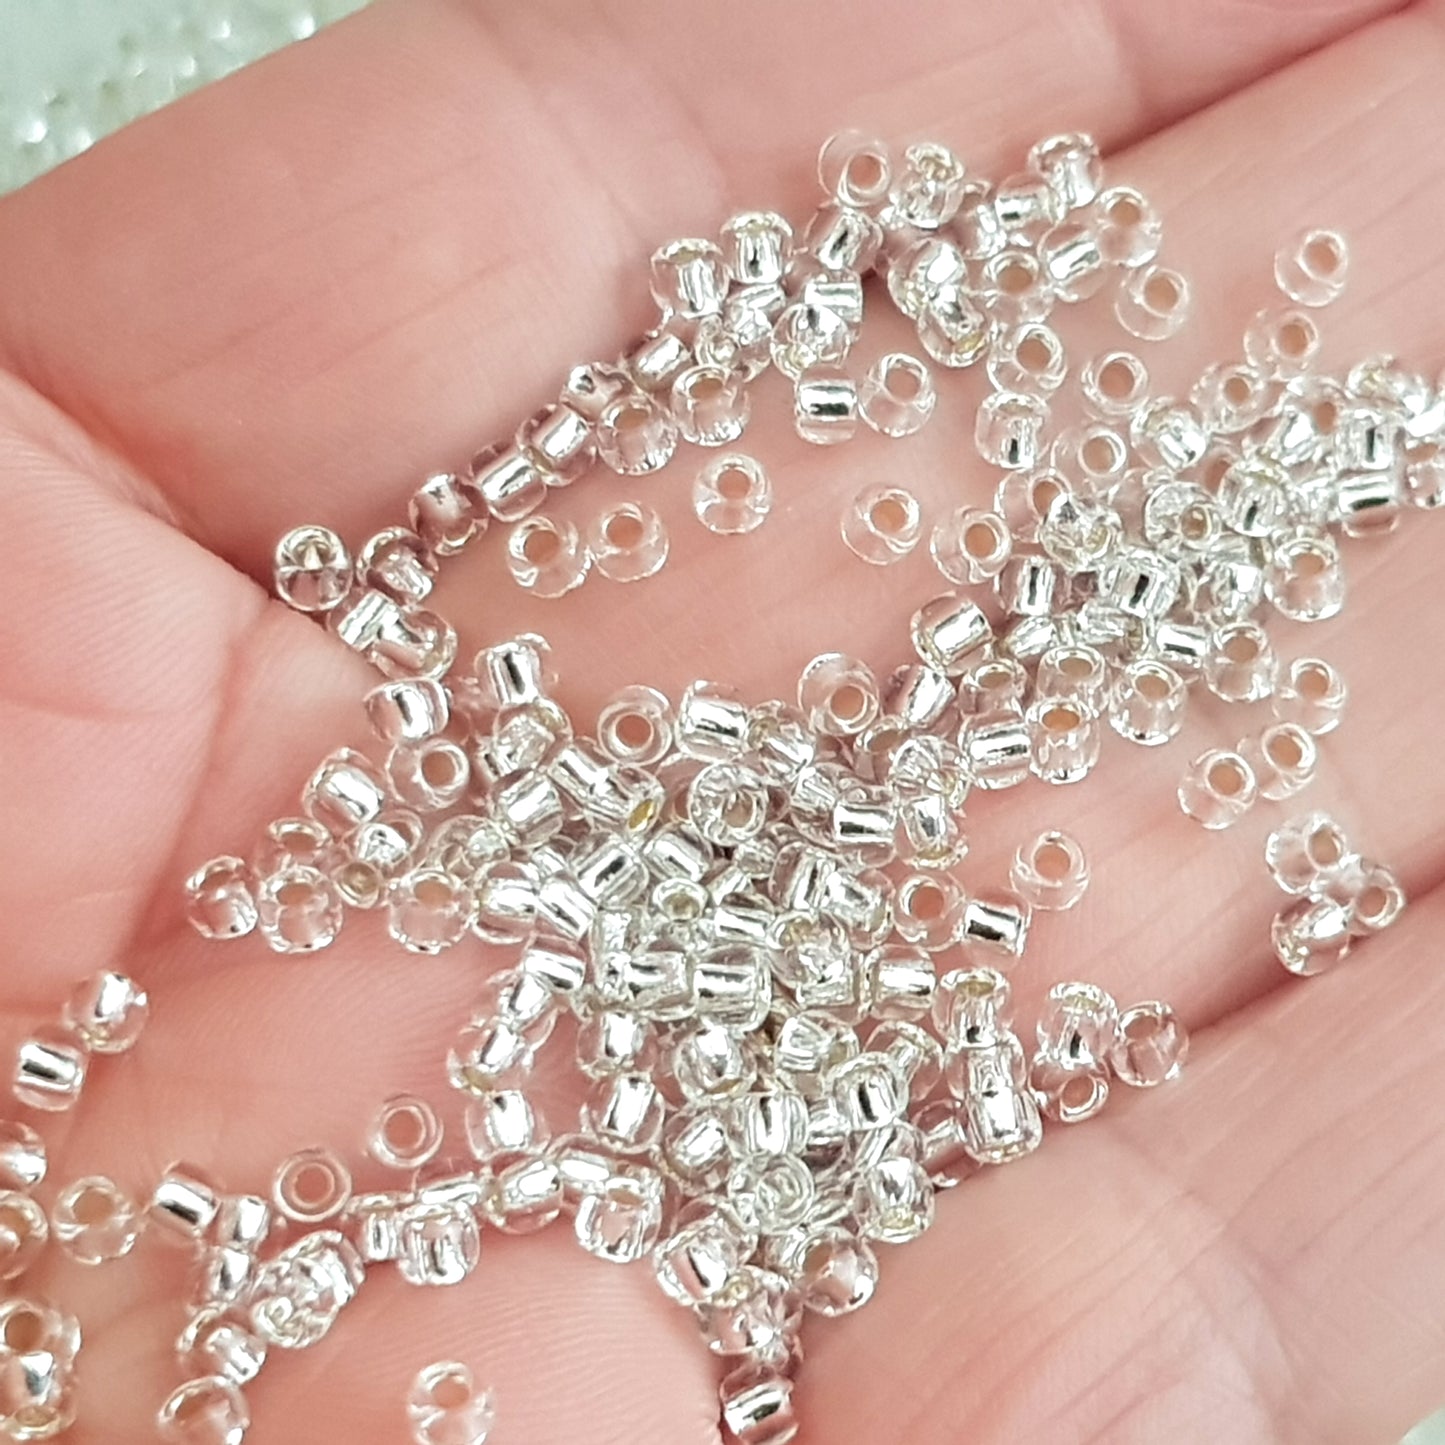 6/0 TR-21 Crystal Silver Lined 10g/30g Round Toho Seed Beads - Beading Supply